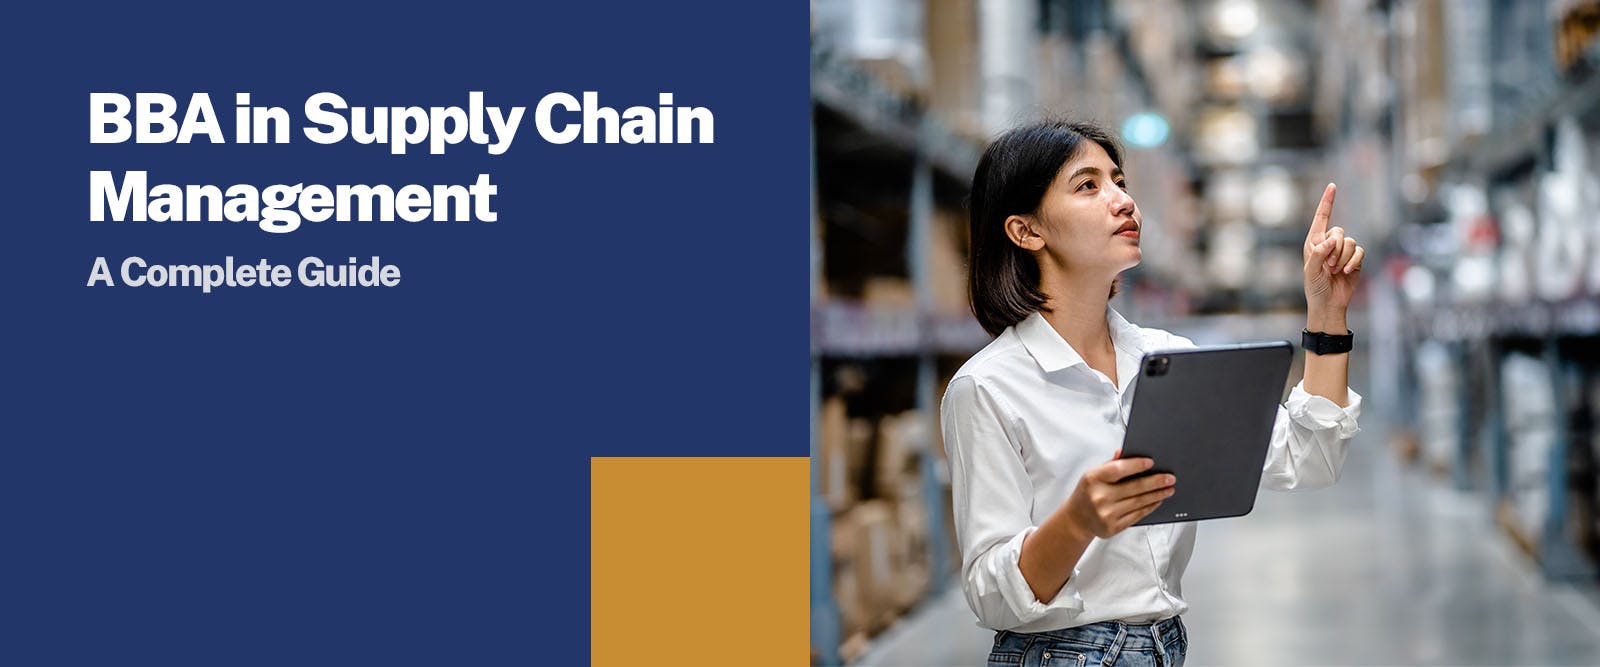 BBA in Supply Chain Management: A Complete Guide